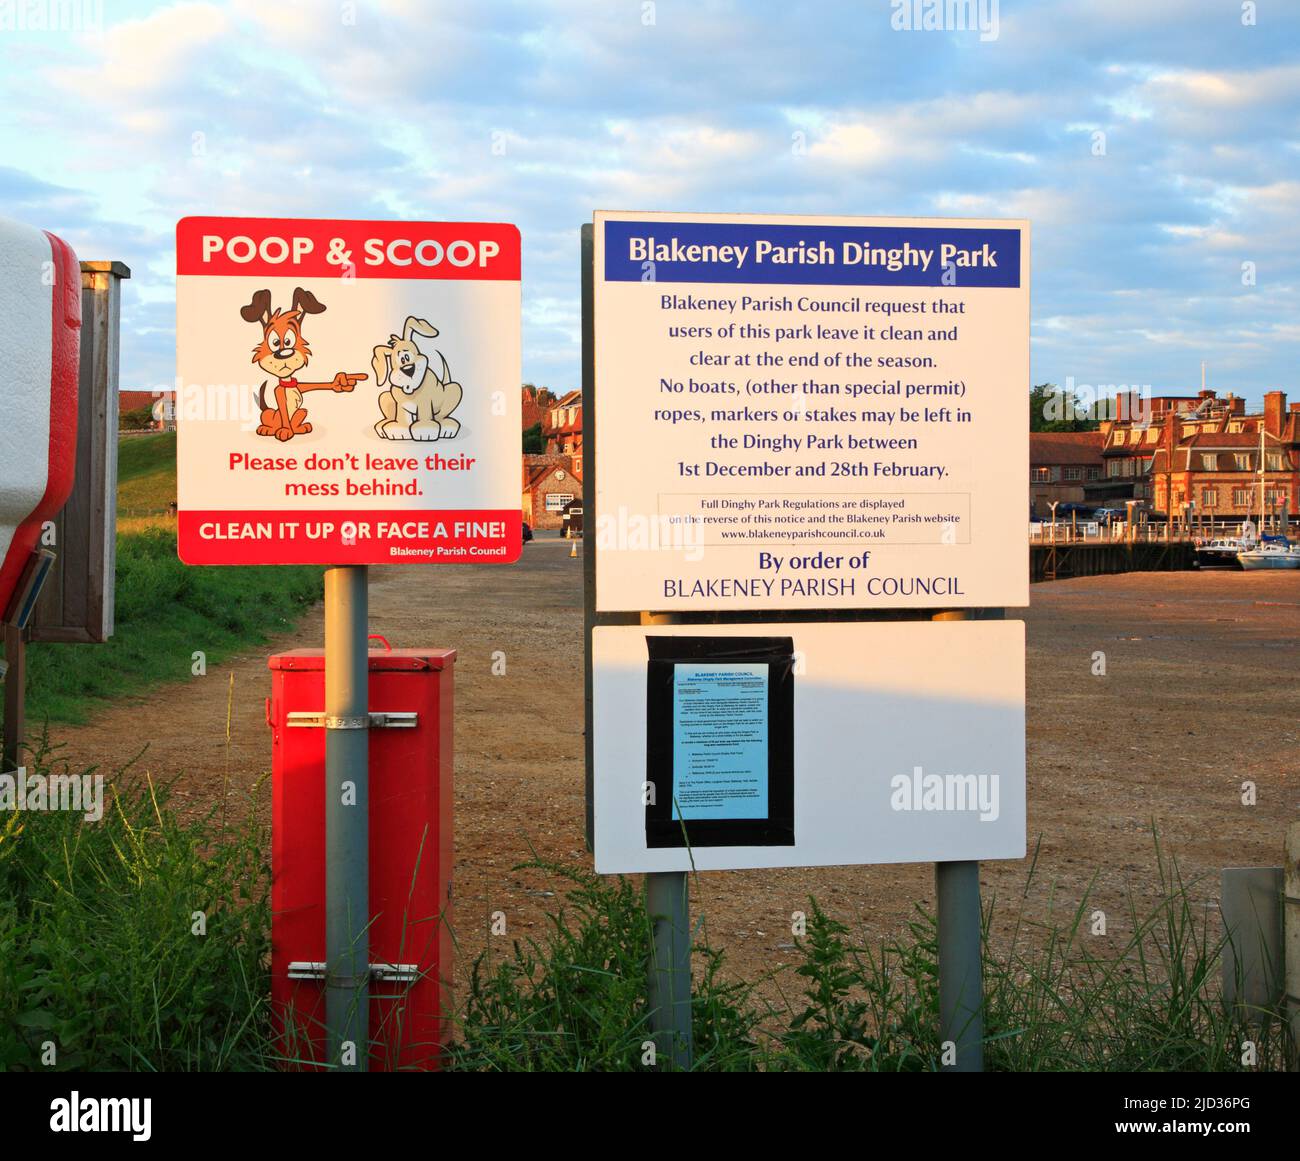 A Dinghy Park notice and a Poop and Scoop notice by the parking area by the quay in the village of Blakeney, Norfolk, England, United Kingdom. Stock Photo